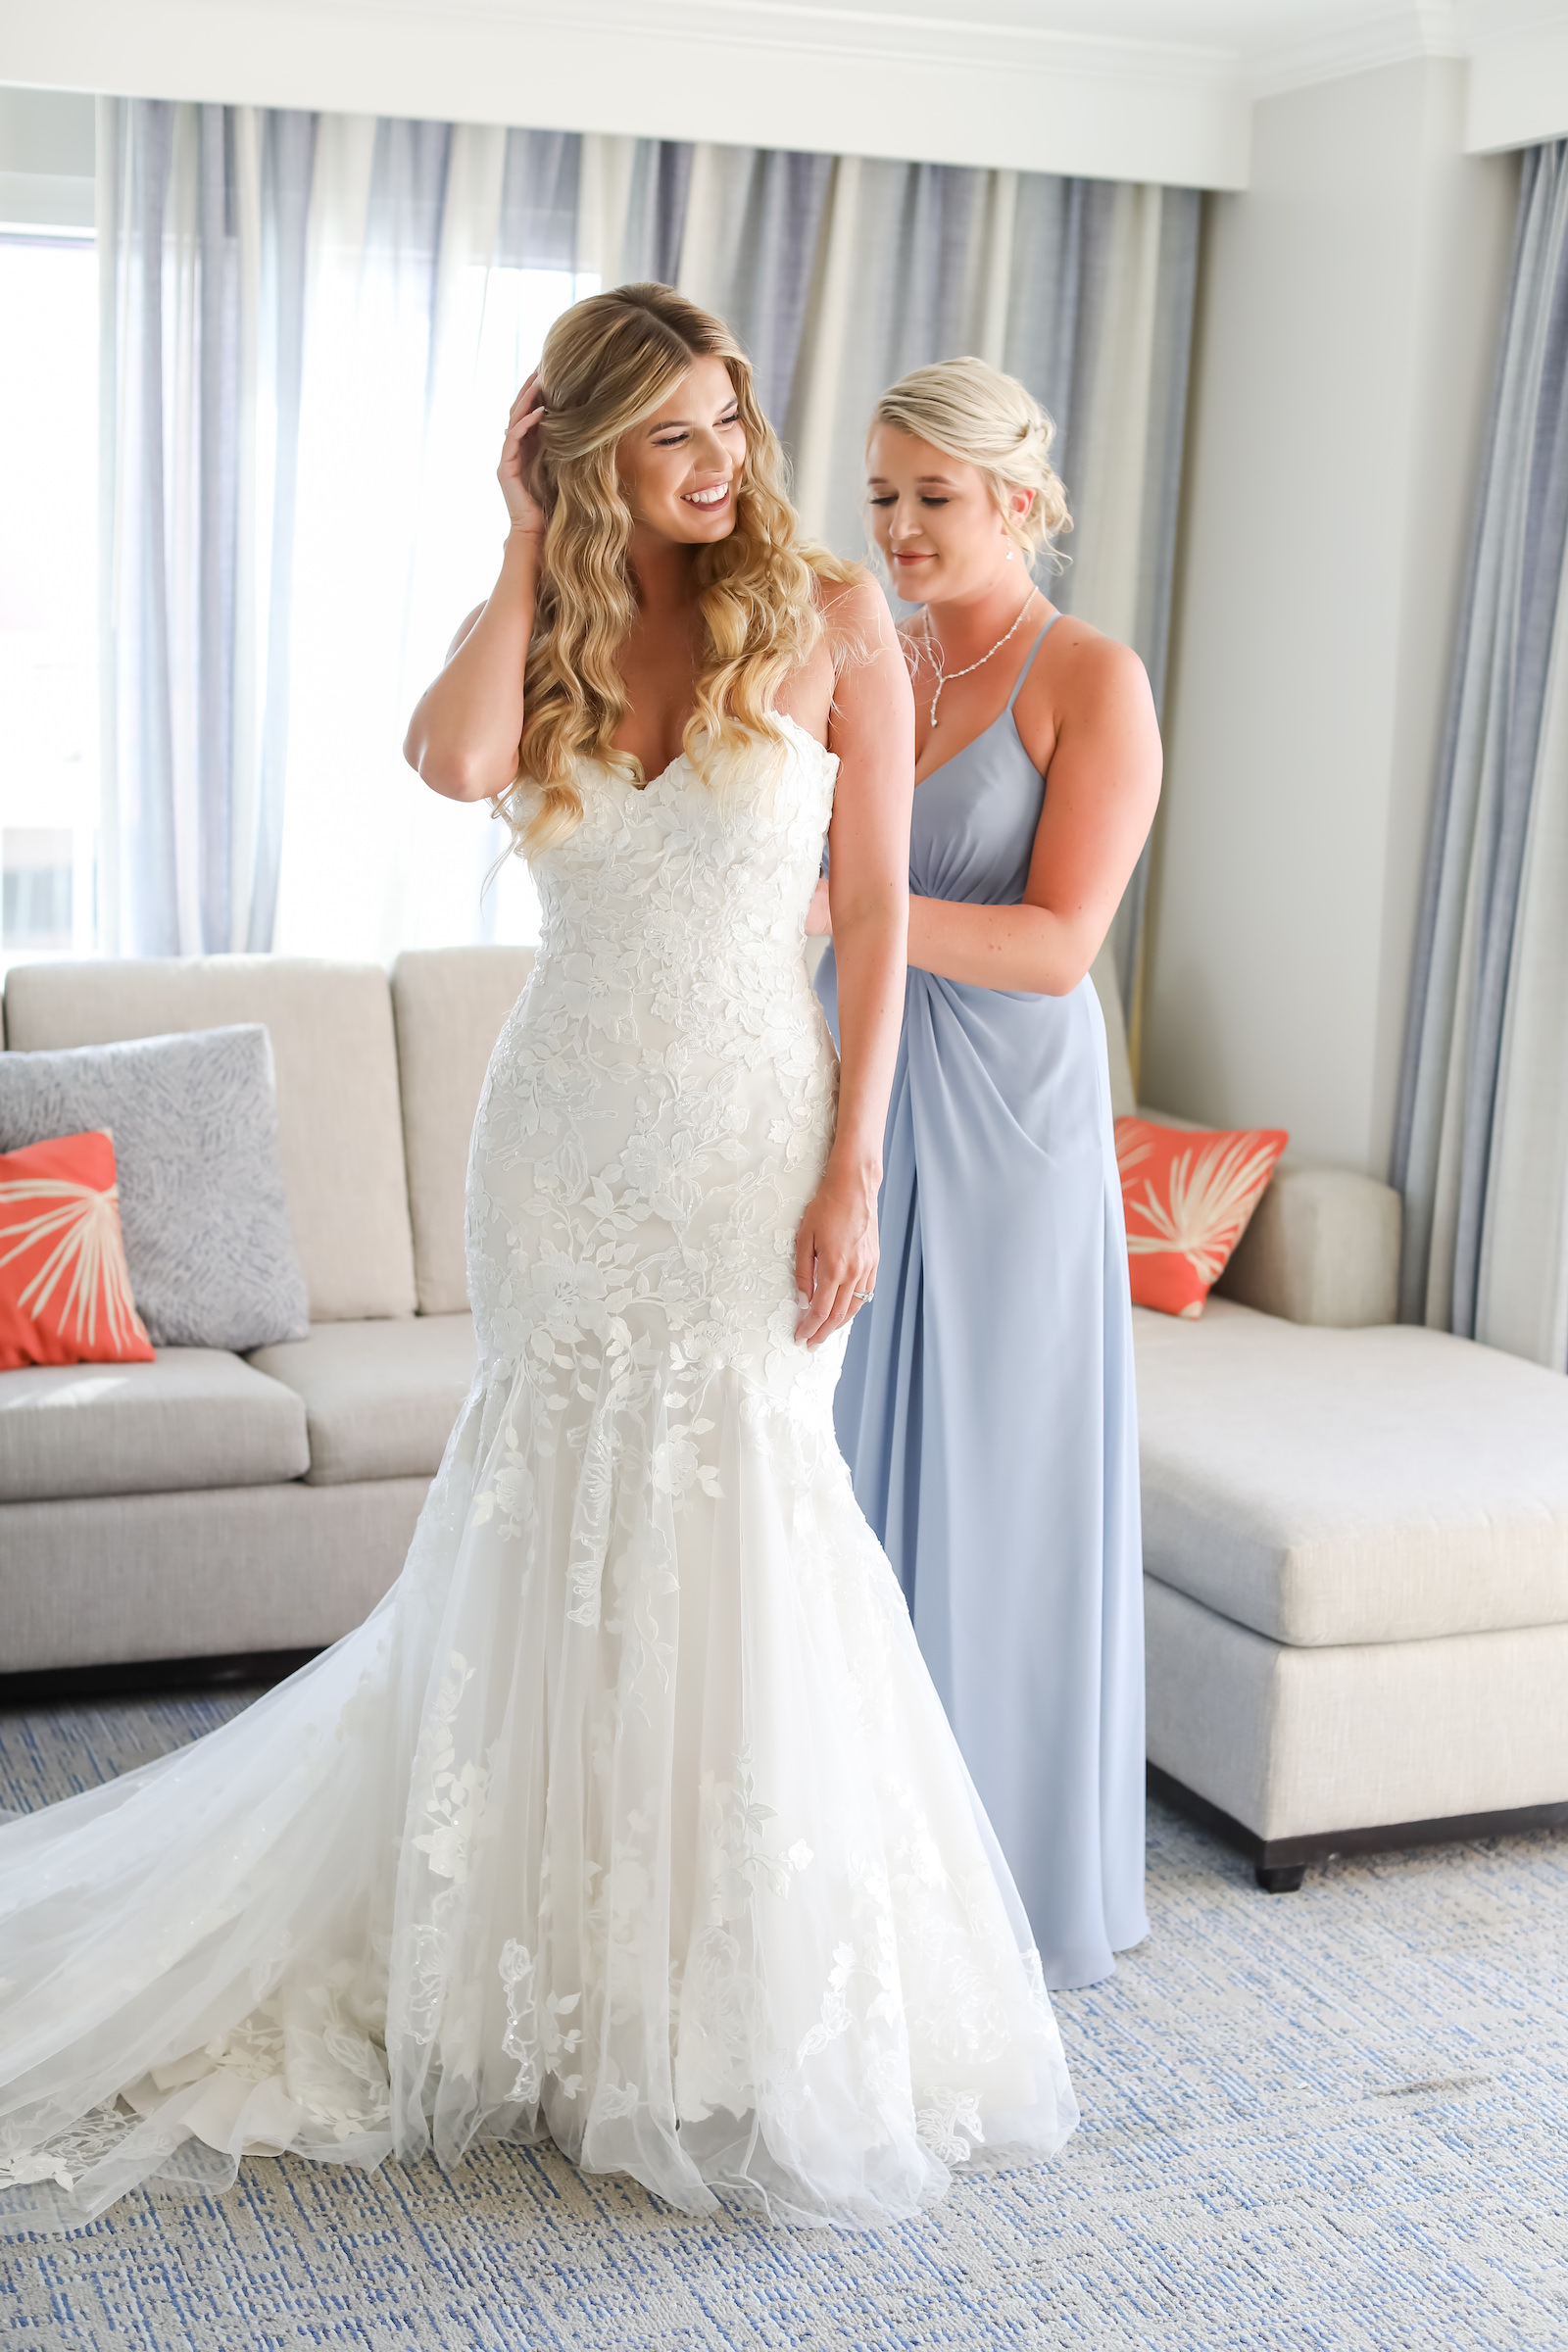 Bride Getting Dressed and Ready | Strapless Lace Sweetheart Mermaid Wedding Dress Bridal Gown | Lifelong Photography Studio